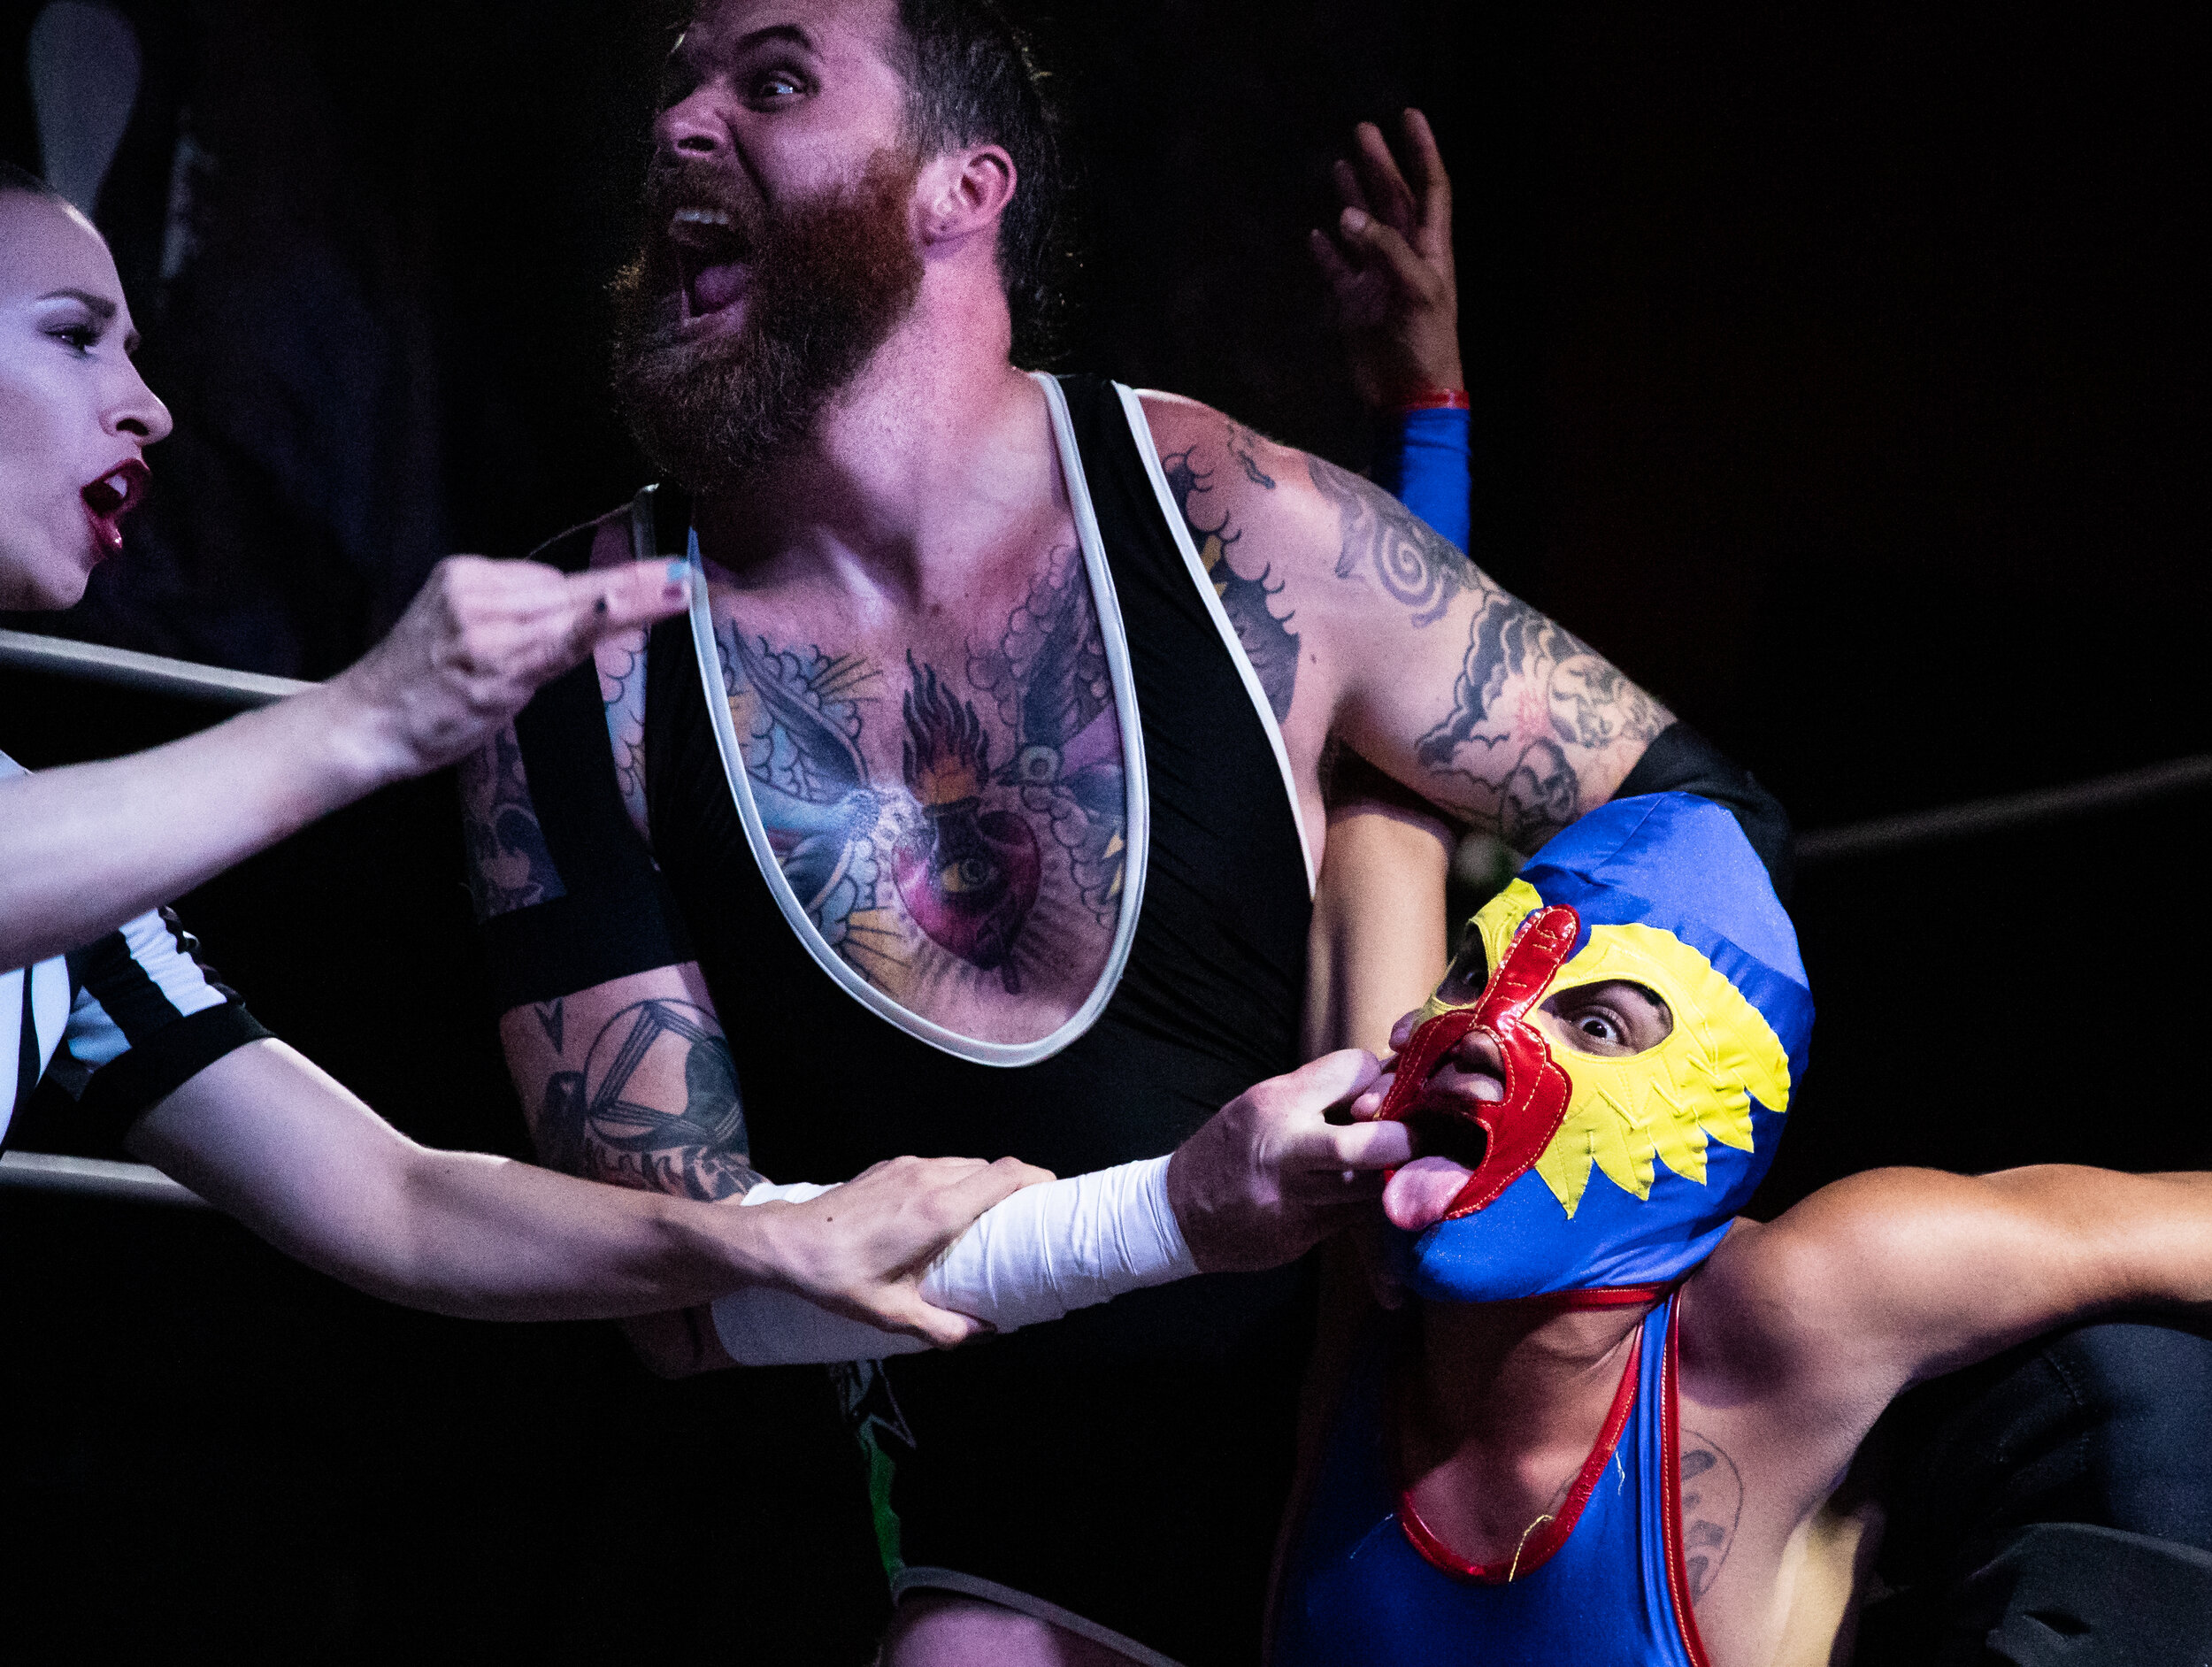  Referee Aubrey "Gearl Hebner" Edwards, left, tries to intervene during the wrestling match between Steve West, center, and lucha "The Bird” on Friday night's 3-2-1 Battle wrestling event at Evolv Fitness in Seattle on October 4, 2019. "I grew up as 